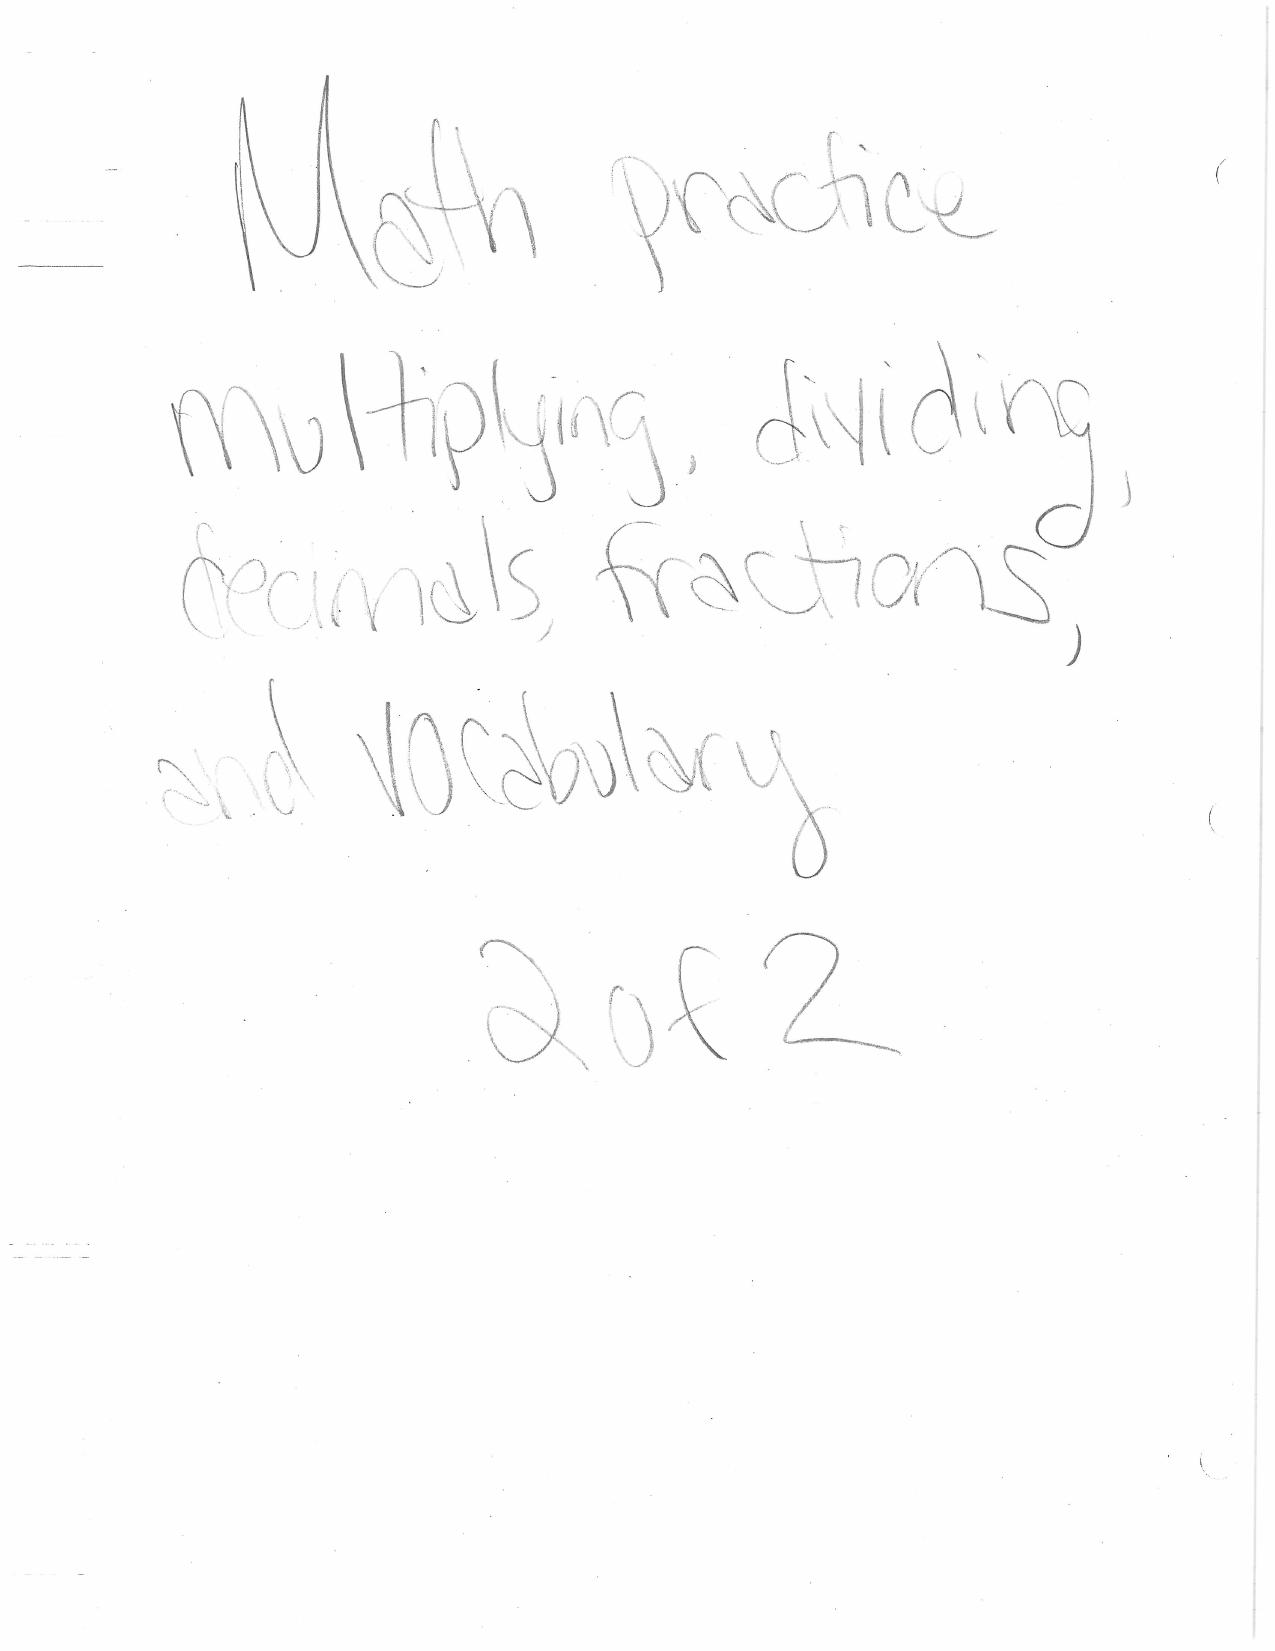 Decimal and Fractions Multip and Dividing by Unknown